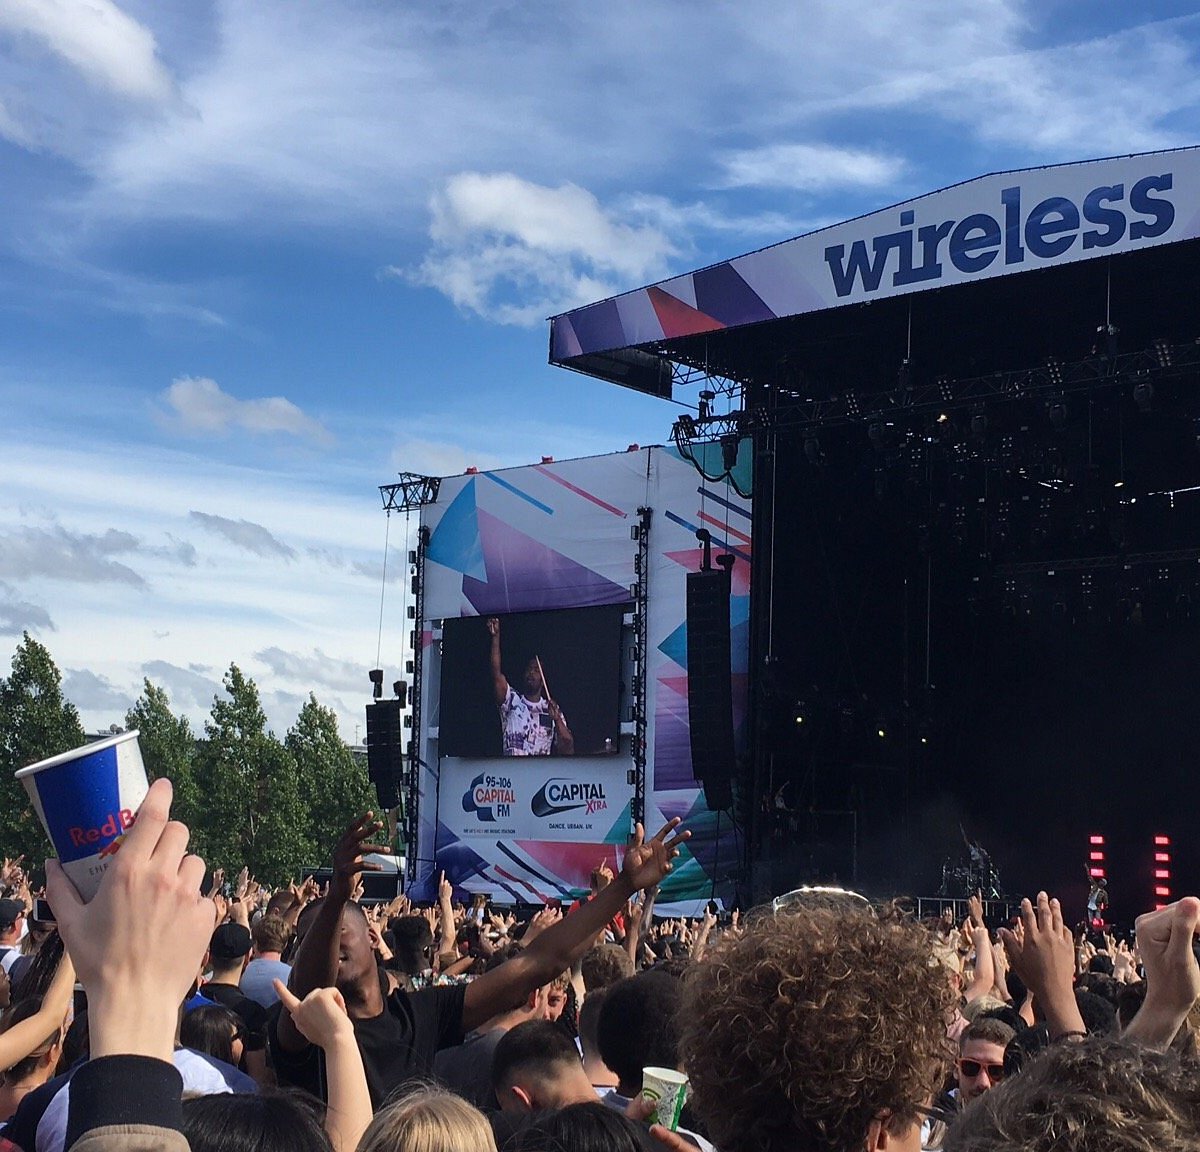 WIRELESS FESTIVAL (London) - All You Need to Know BEFORE You Go